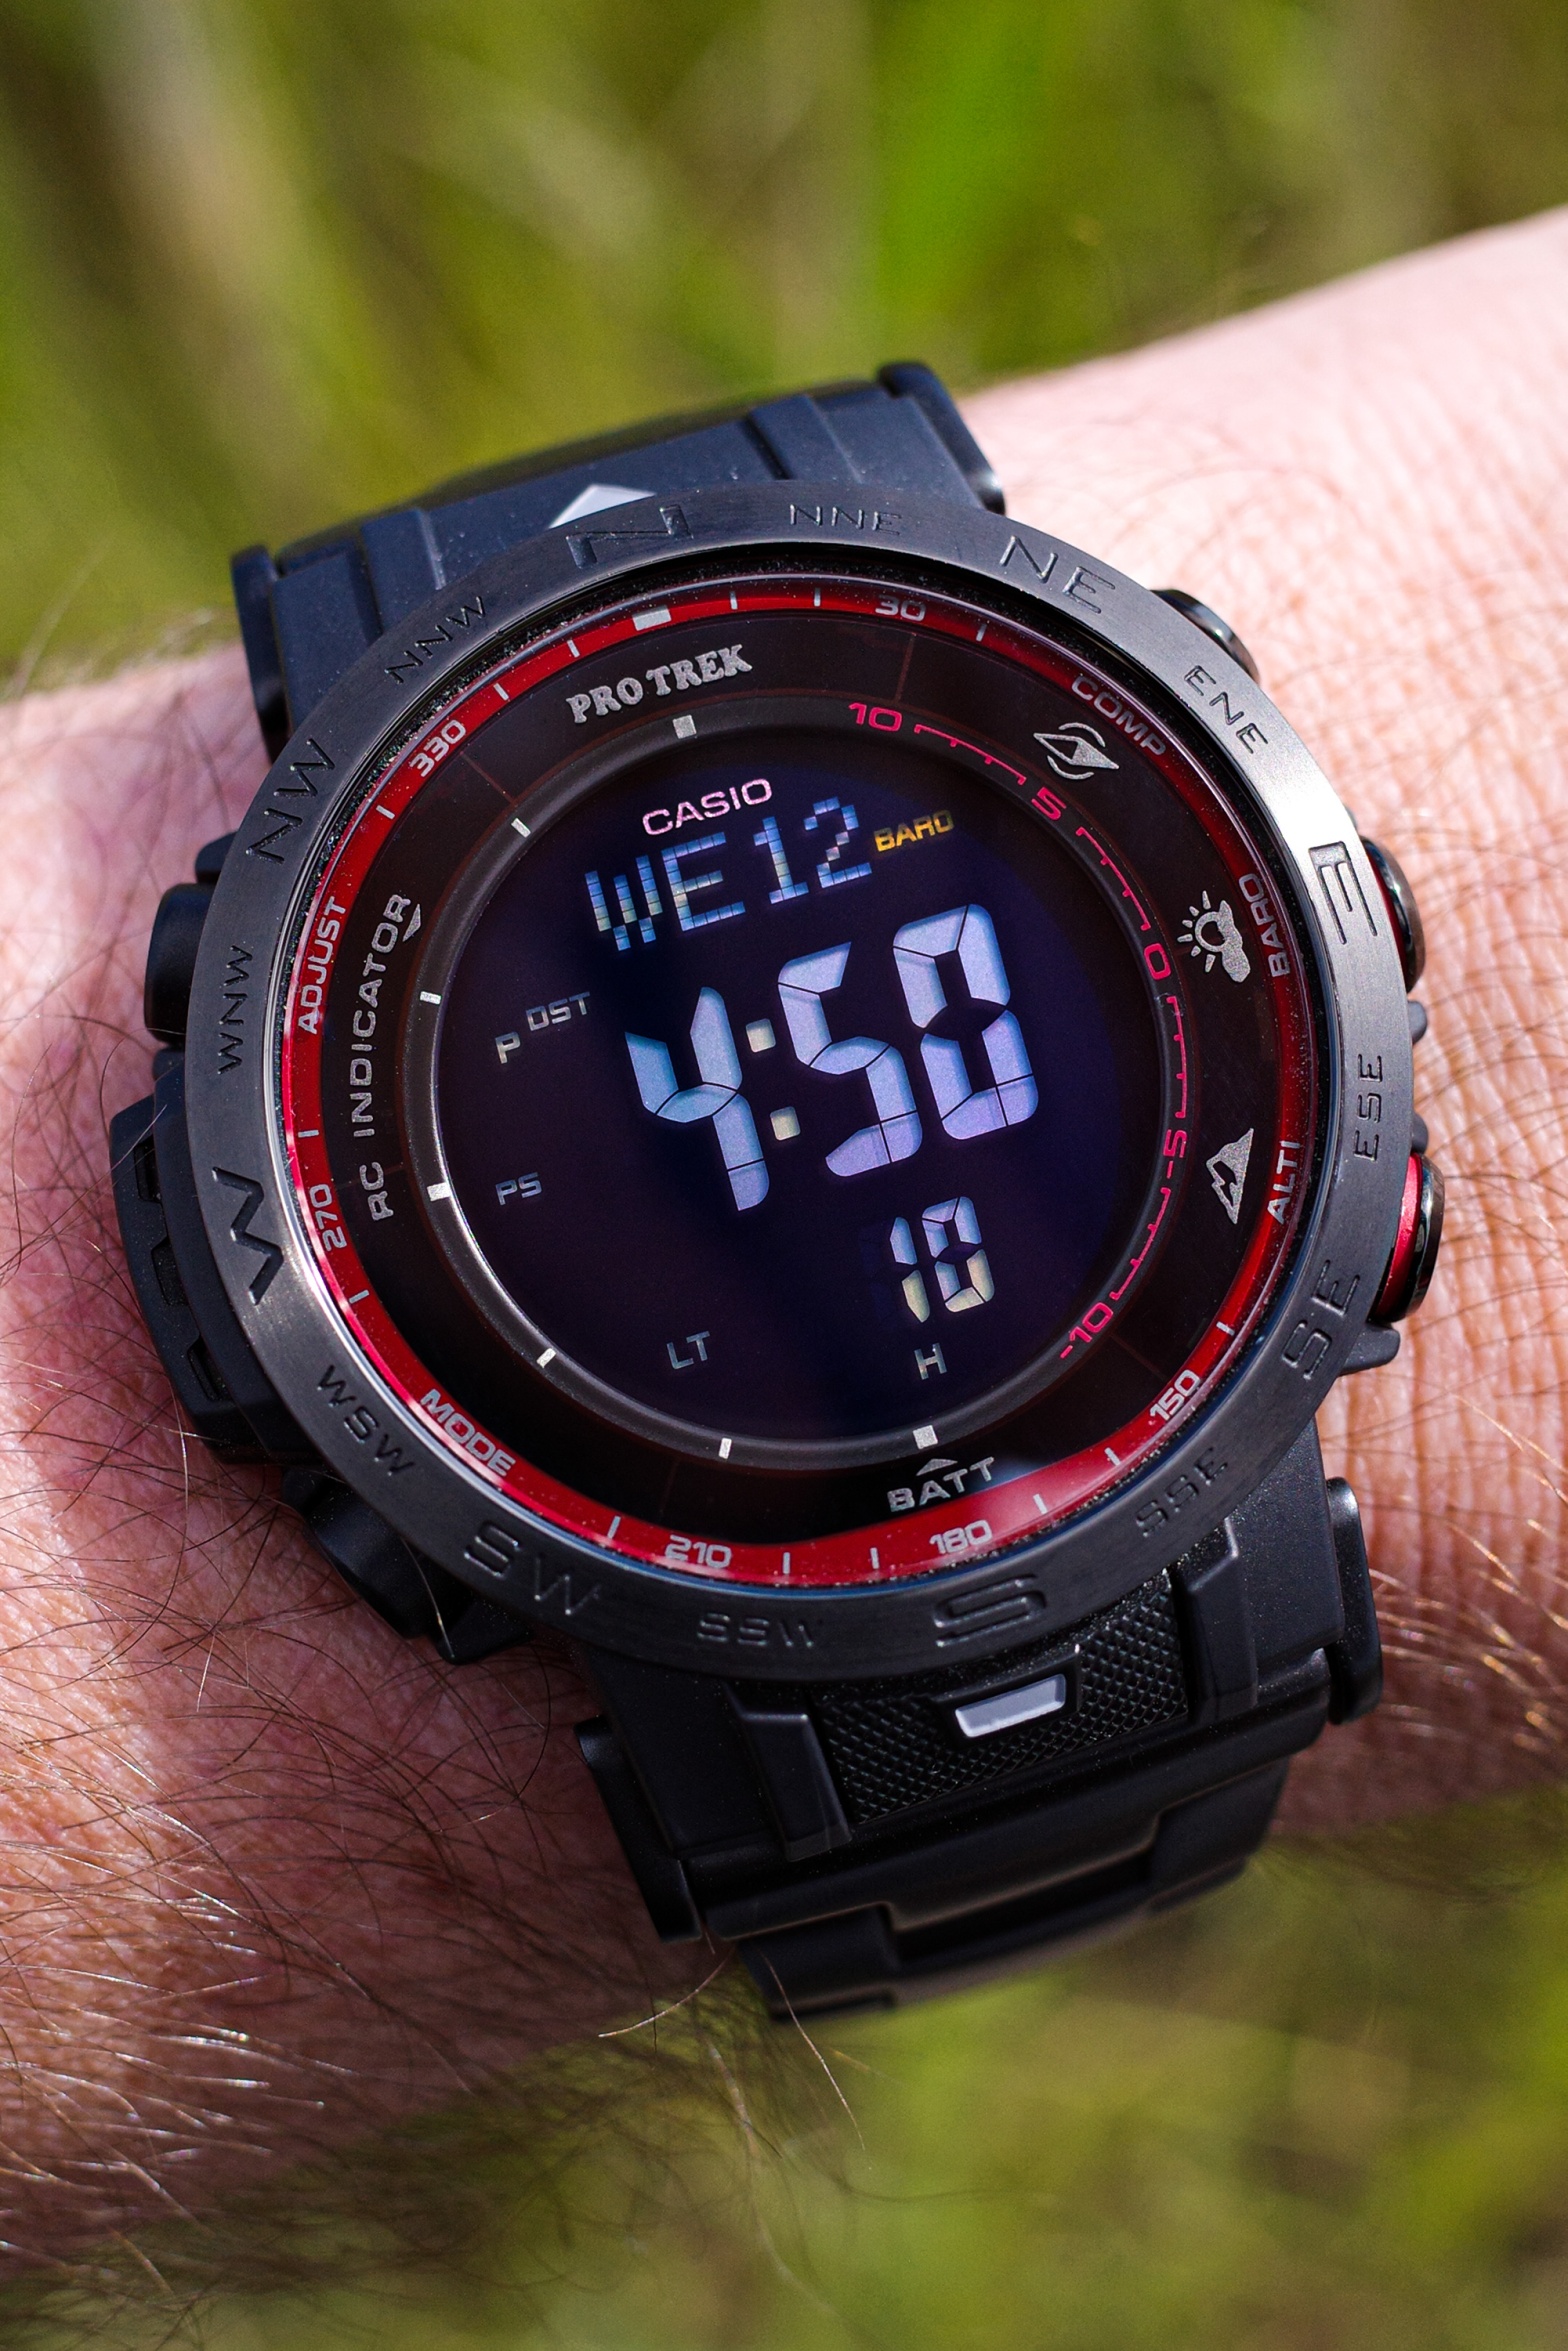 Casio Pro-Trek PRW-30 Firefall Edition Review – The Best Watch in the World – Maximum Functionality